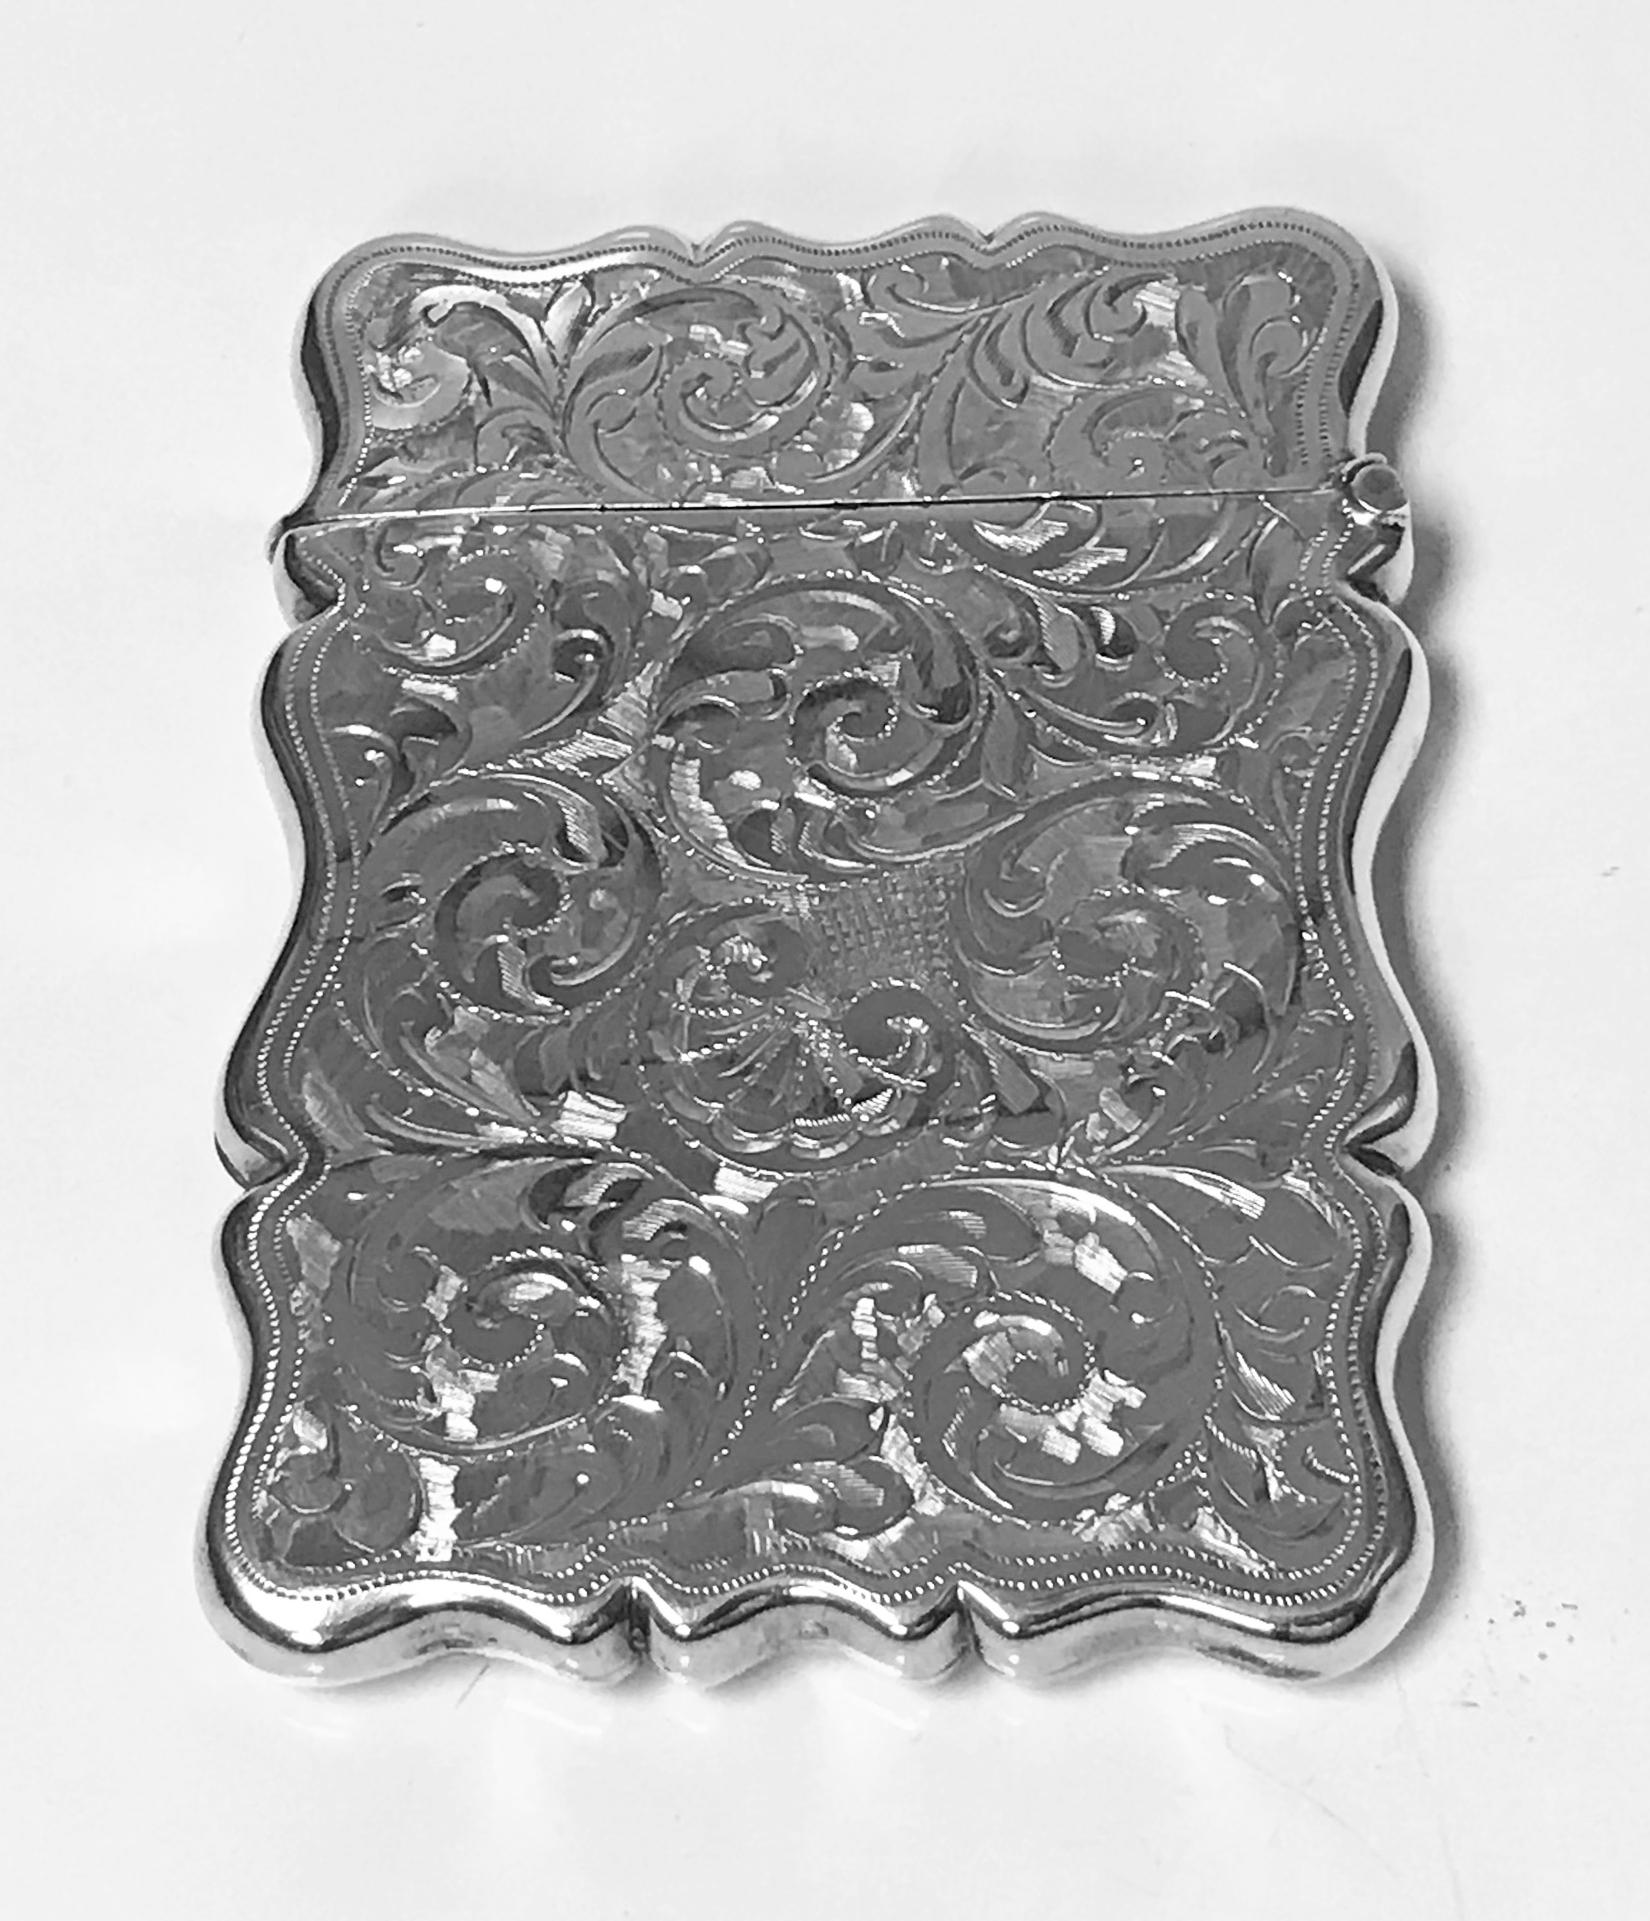 Antique Silver Card Case, Birmingham 1906, Joseph Gloster. Very finely engraved foliage. Vacant cartouche to front. Measures: 3.6 x 2.6 inches. Item Weight: 60.70 grams. Fully hallmarked.